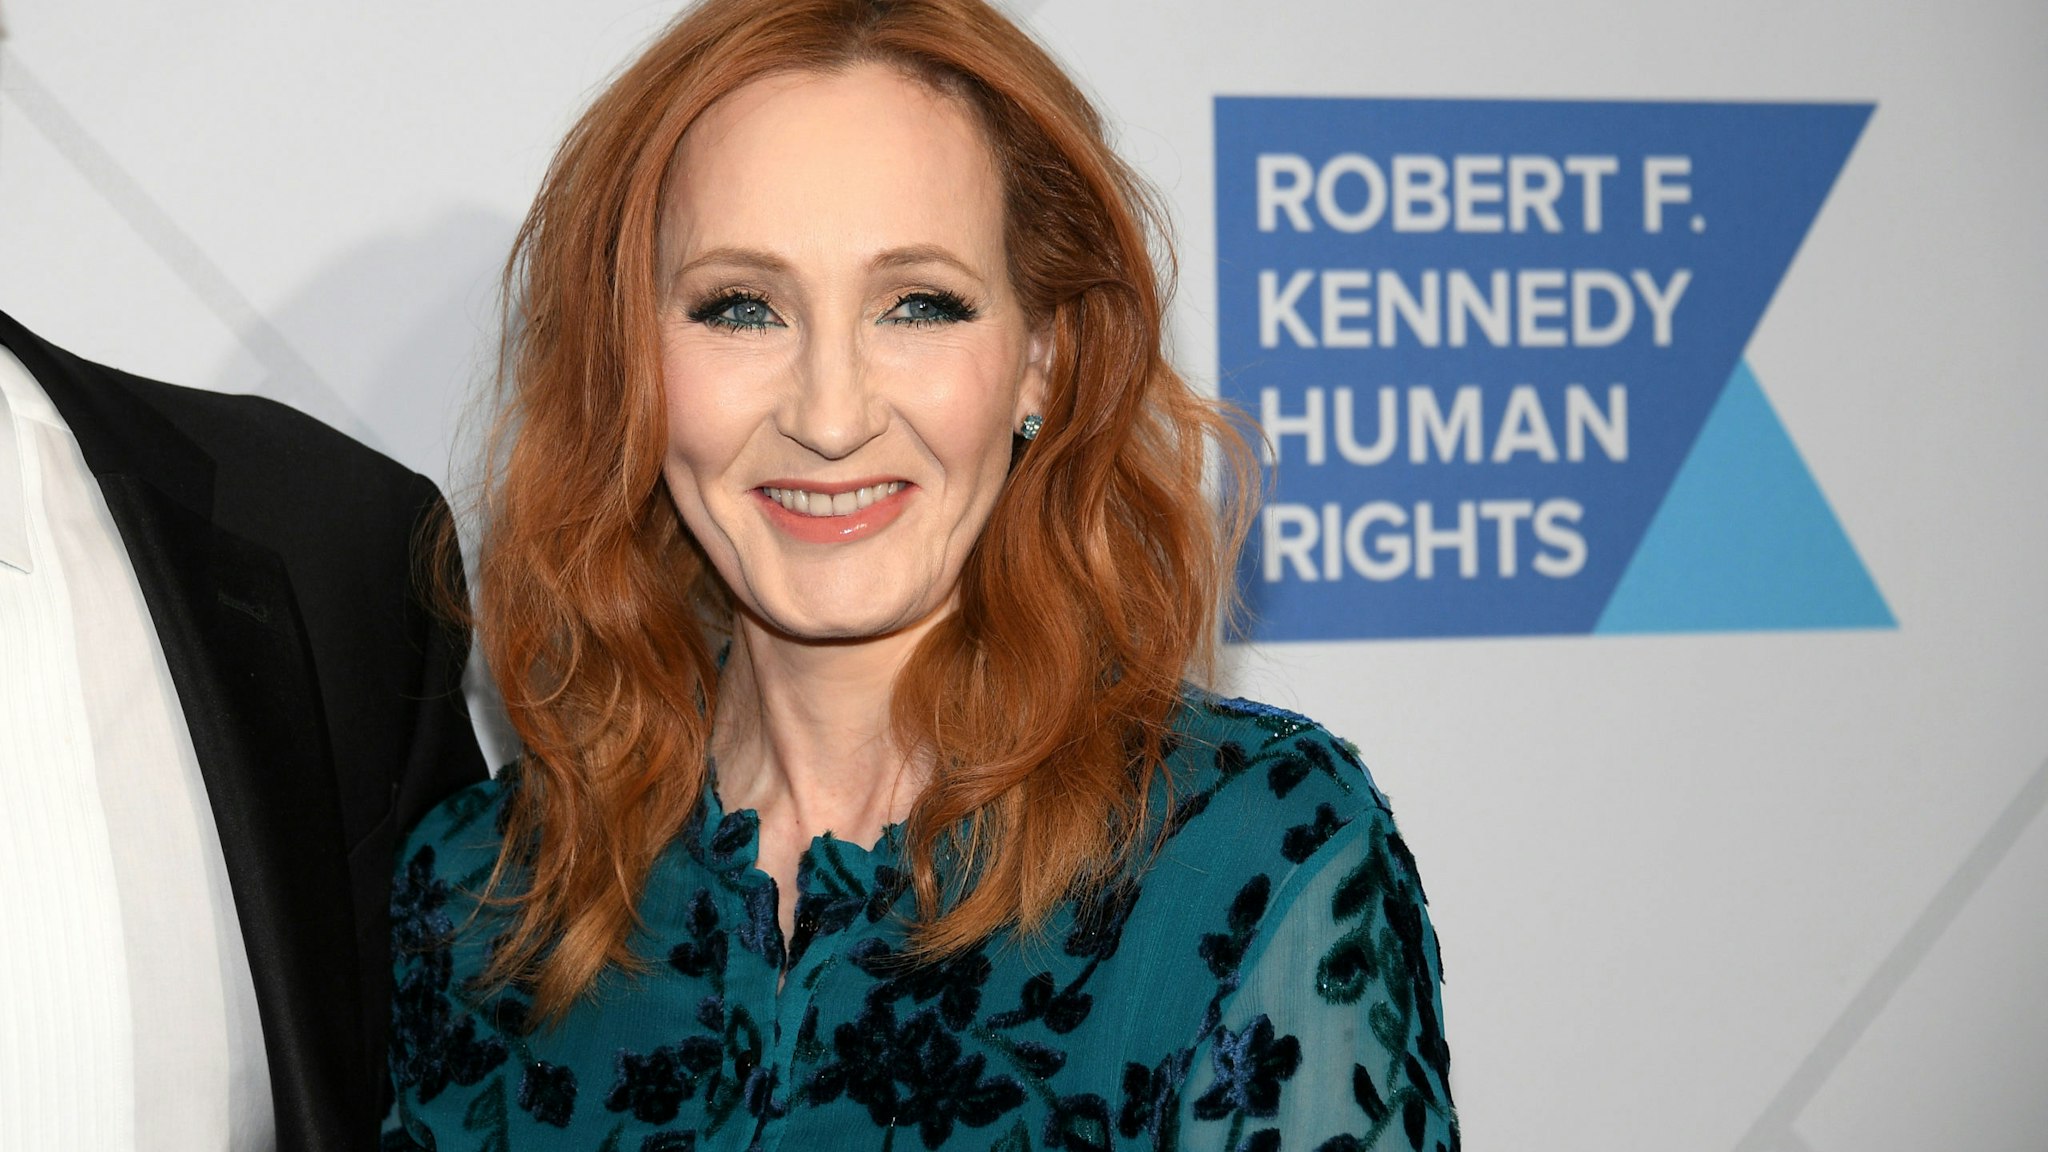 NEW YORK, NEW YORK - DECEMBER 12: Author J.K. Rowling arrives at the RFK Ripple of Hope Awards at New York Hilton Midtown on December 12, 2019 in New York City. (Photo by Dia Dipasupil/Getty Images)